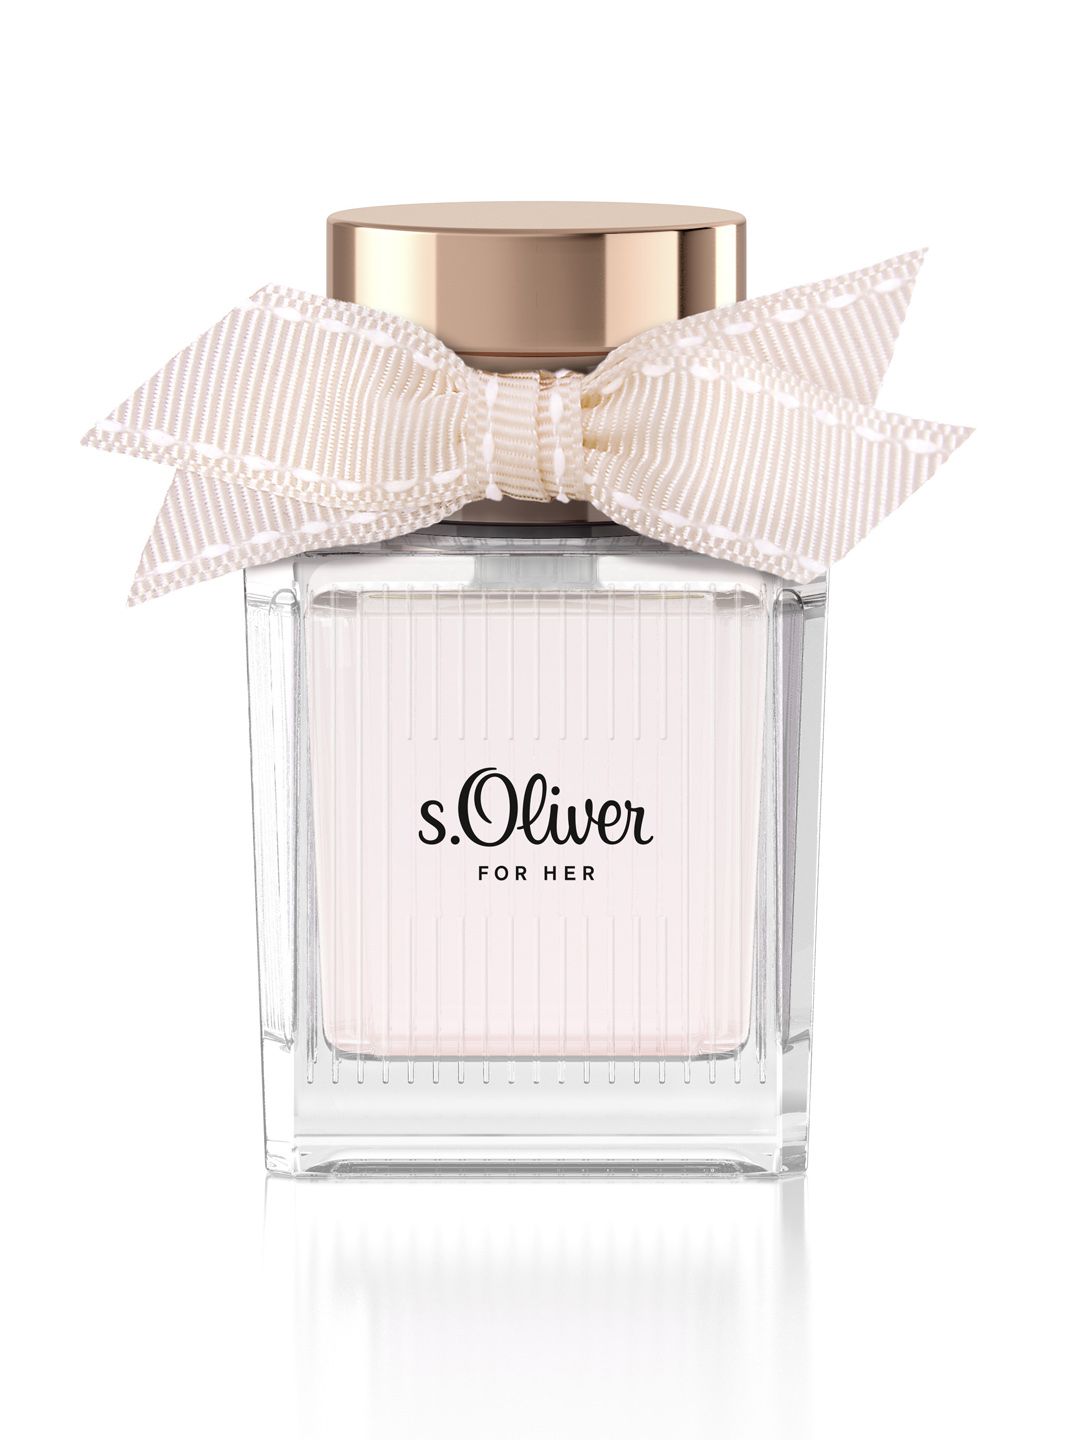 s.Oliver For Her Eau De Toilette 30ml Price in India